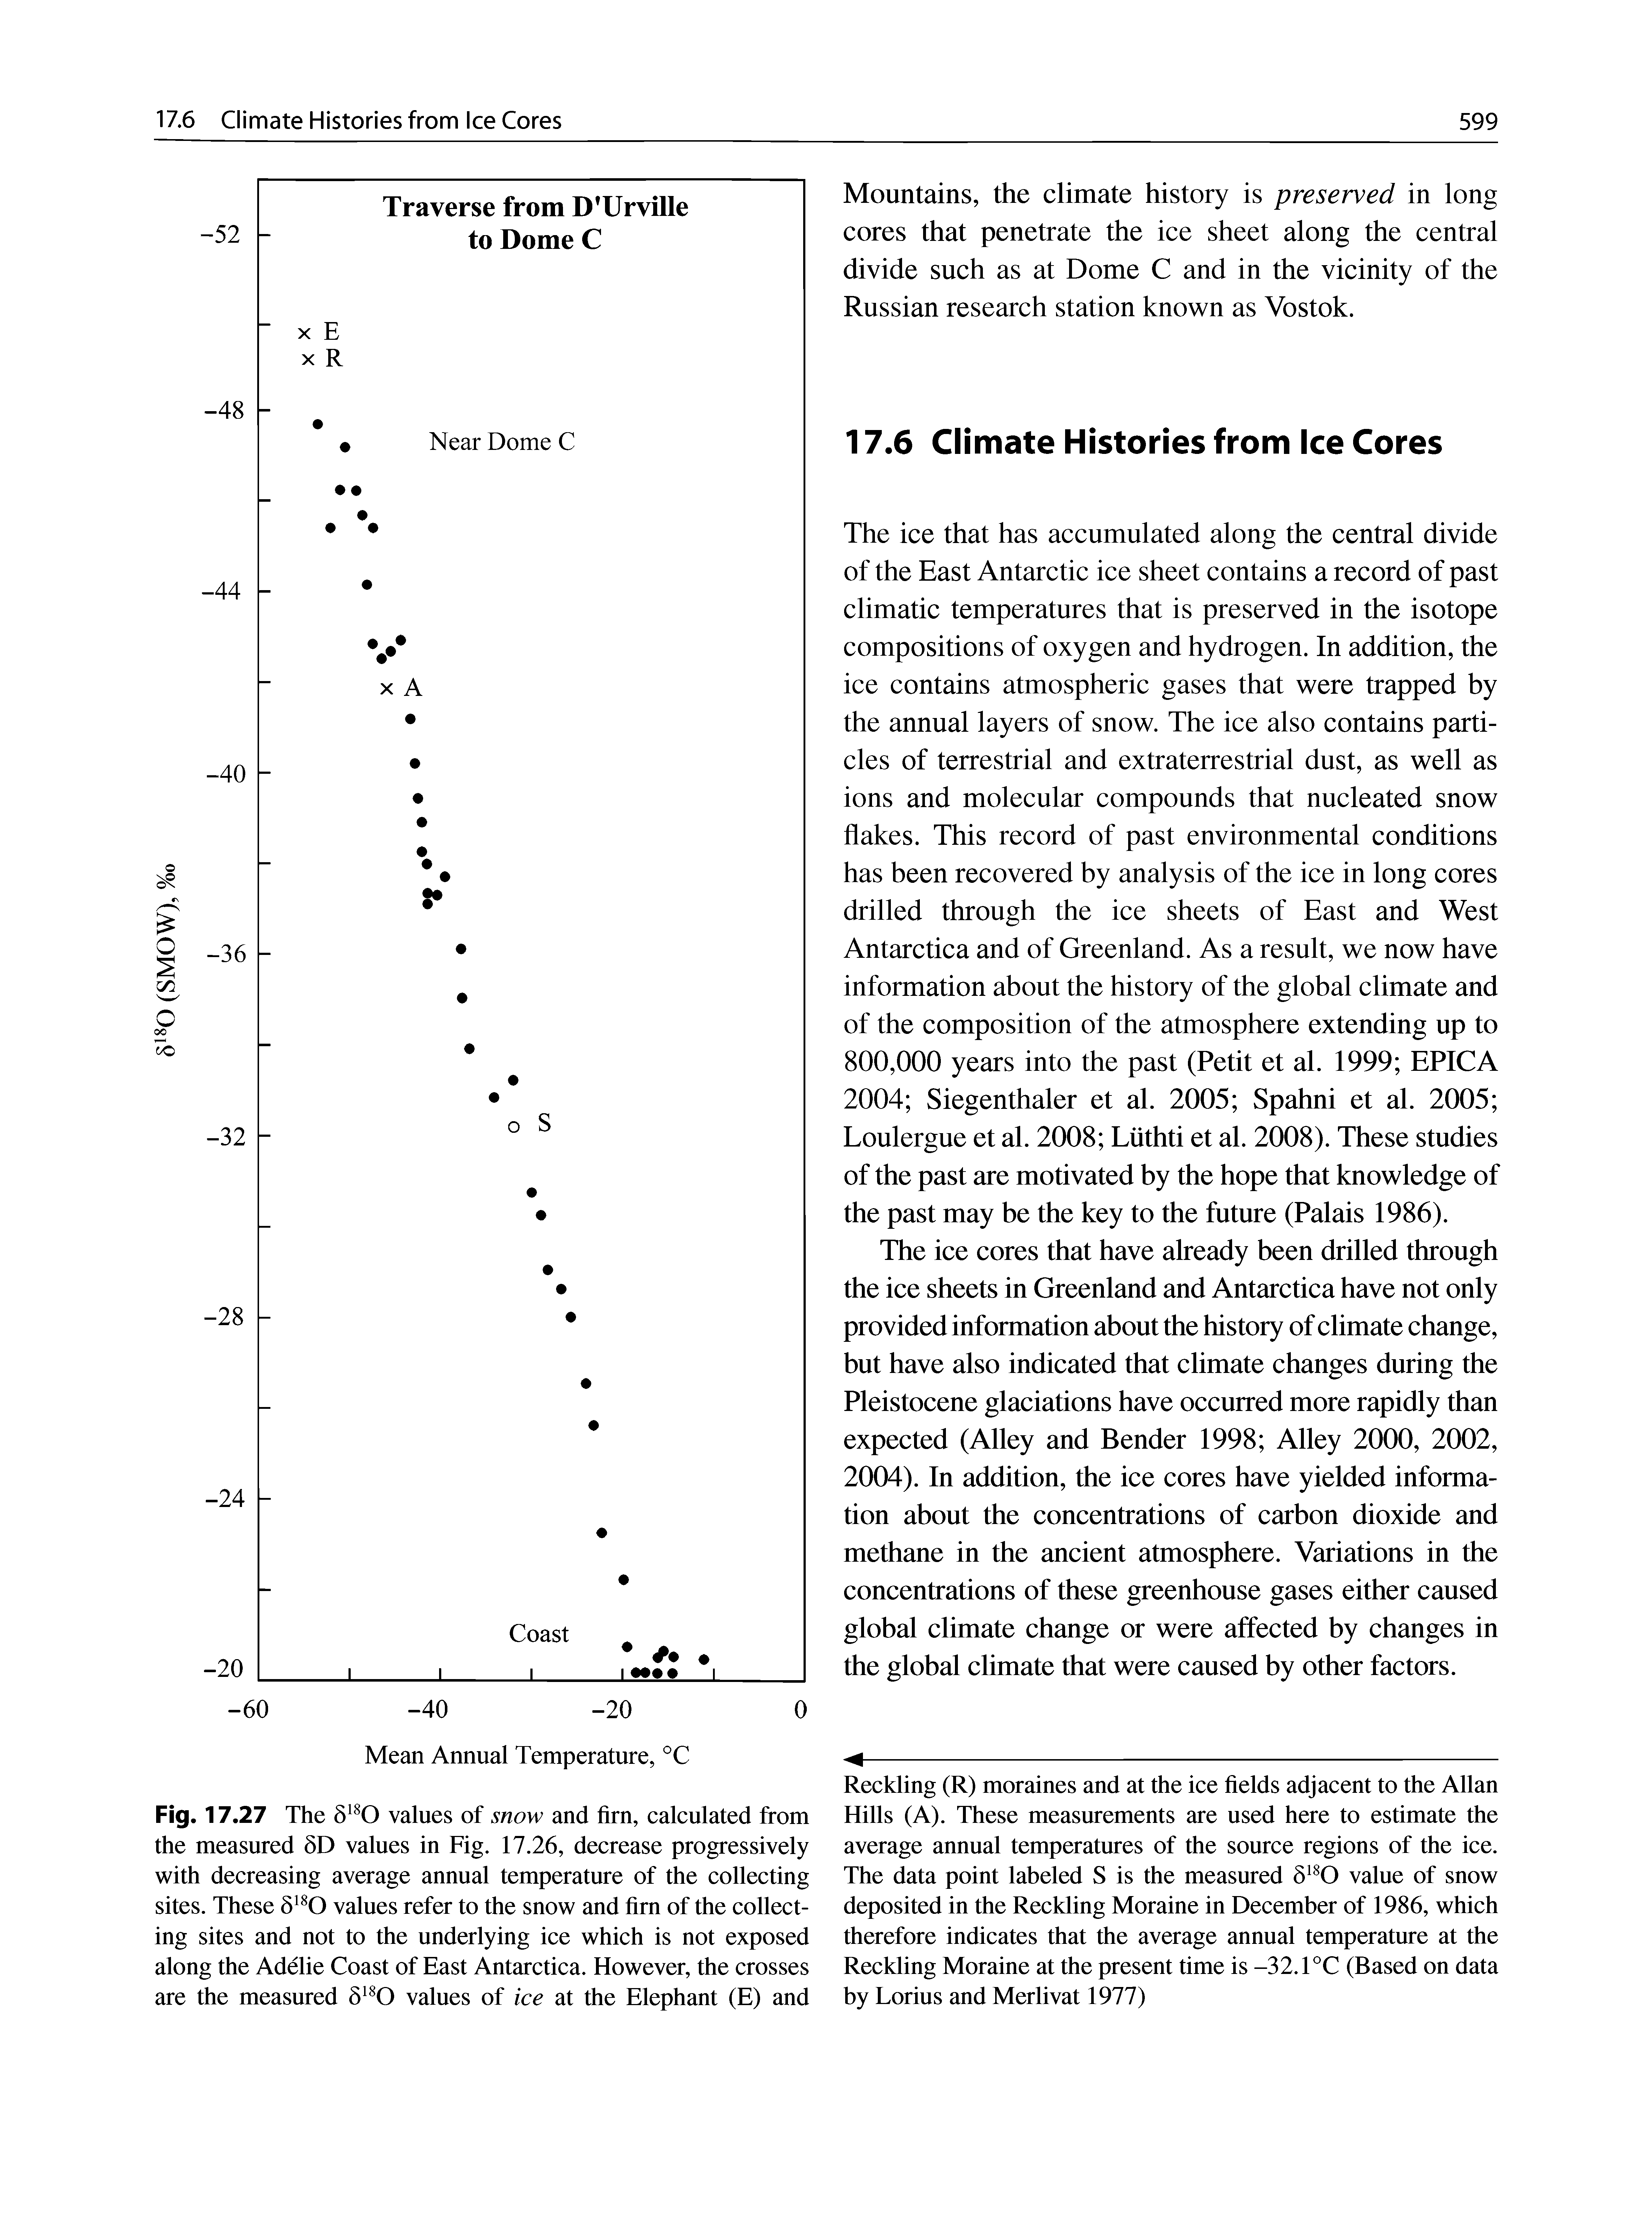 Fig. 17.27 The values of snow and firn, calculated from the measured 5D values in Fig. 17.26, decrease progressively with decreasing average annual temperature of the collecting sites. These values refer to the snow and firn of the collecting sites and not to the underlying ice which is not exposed along the Adelie Coast of East Antarctica. However, the crosses are the measured values of ice at the Elephant (E) and...